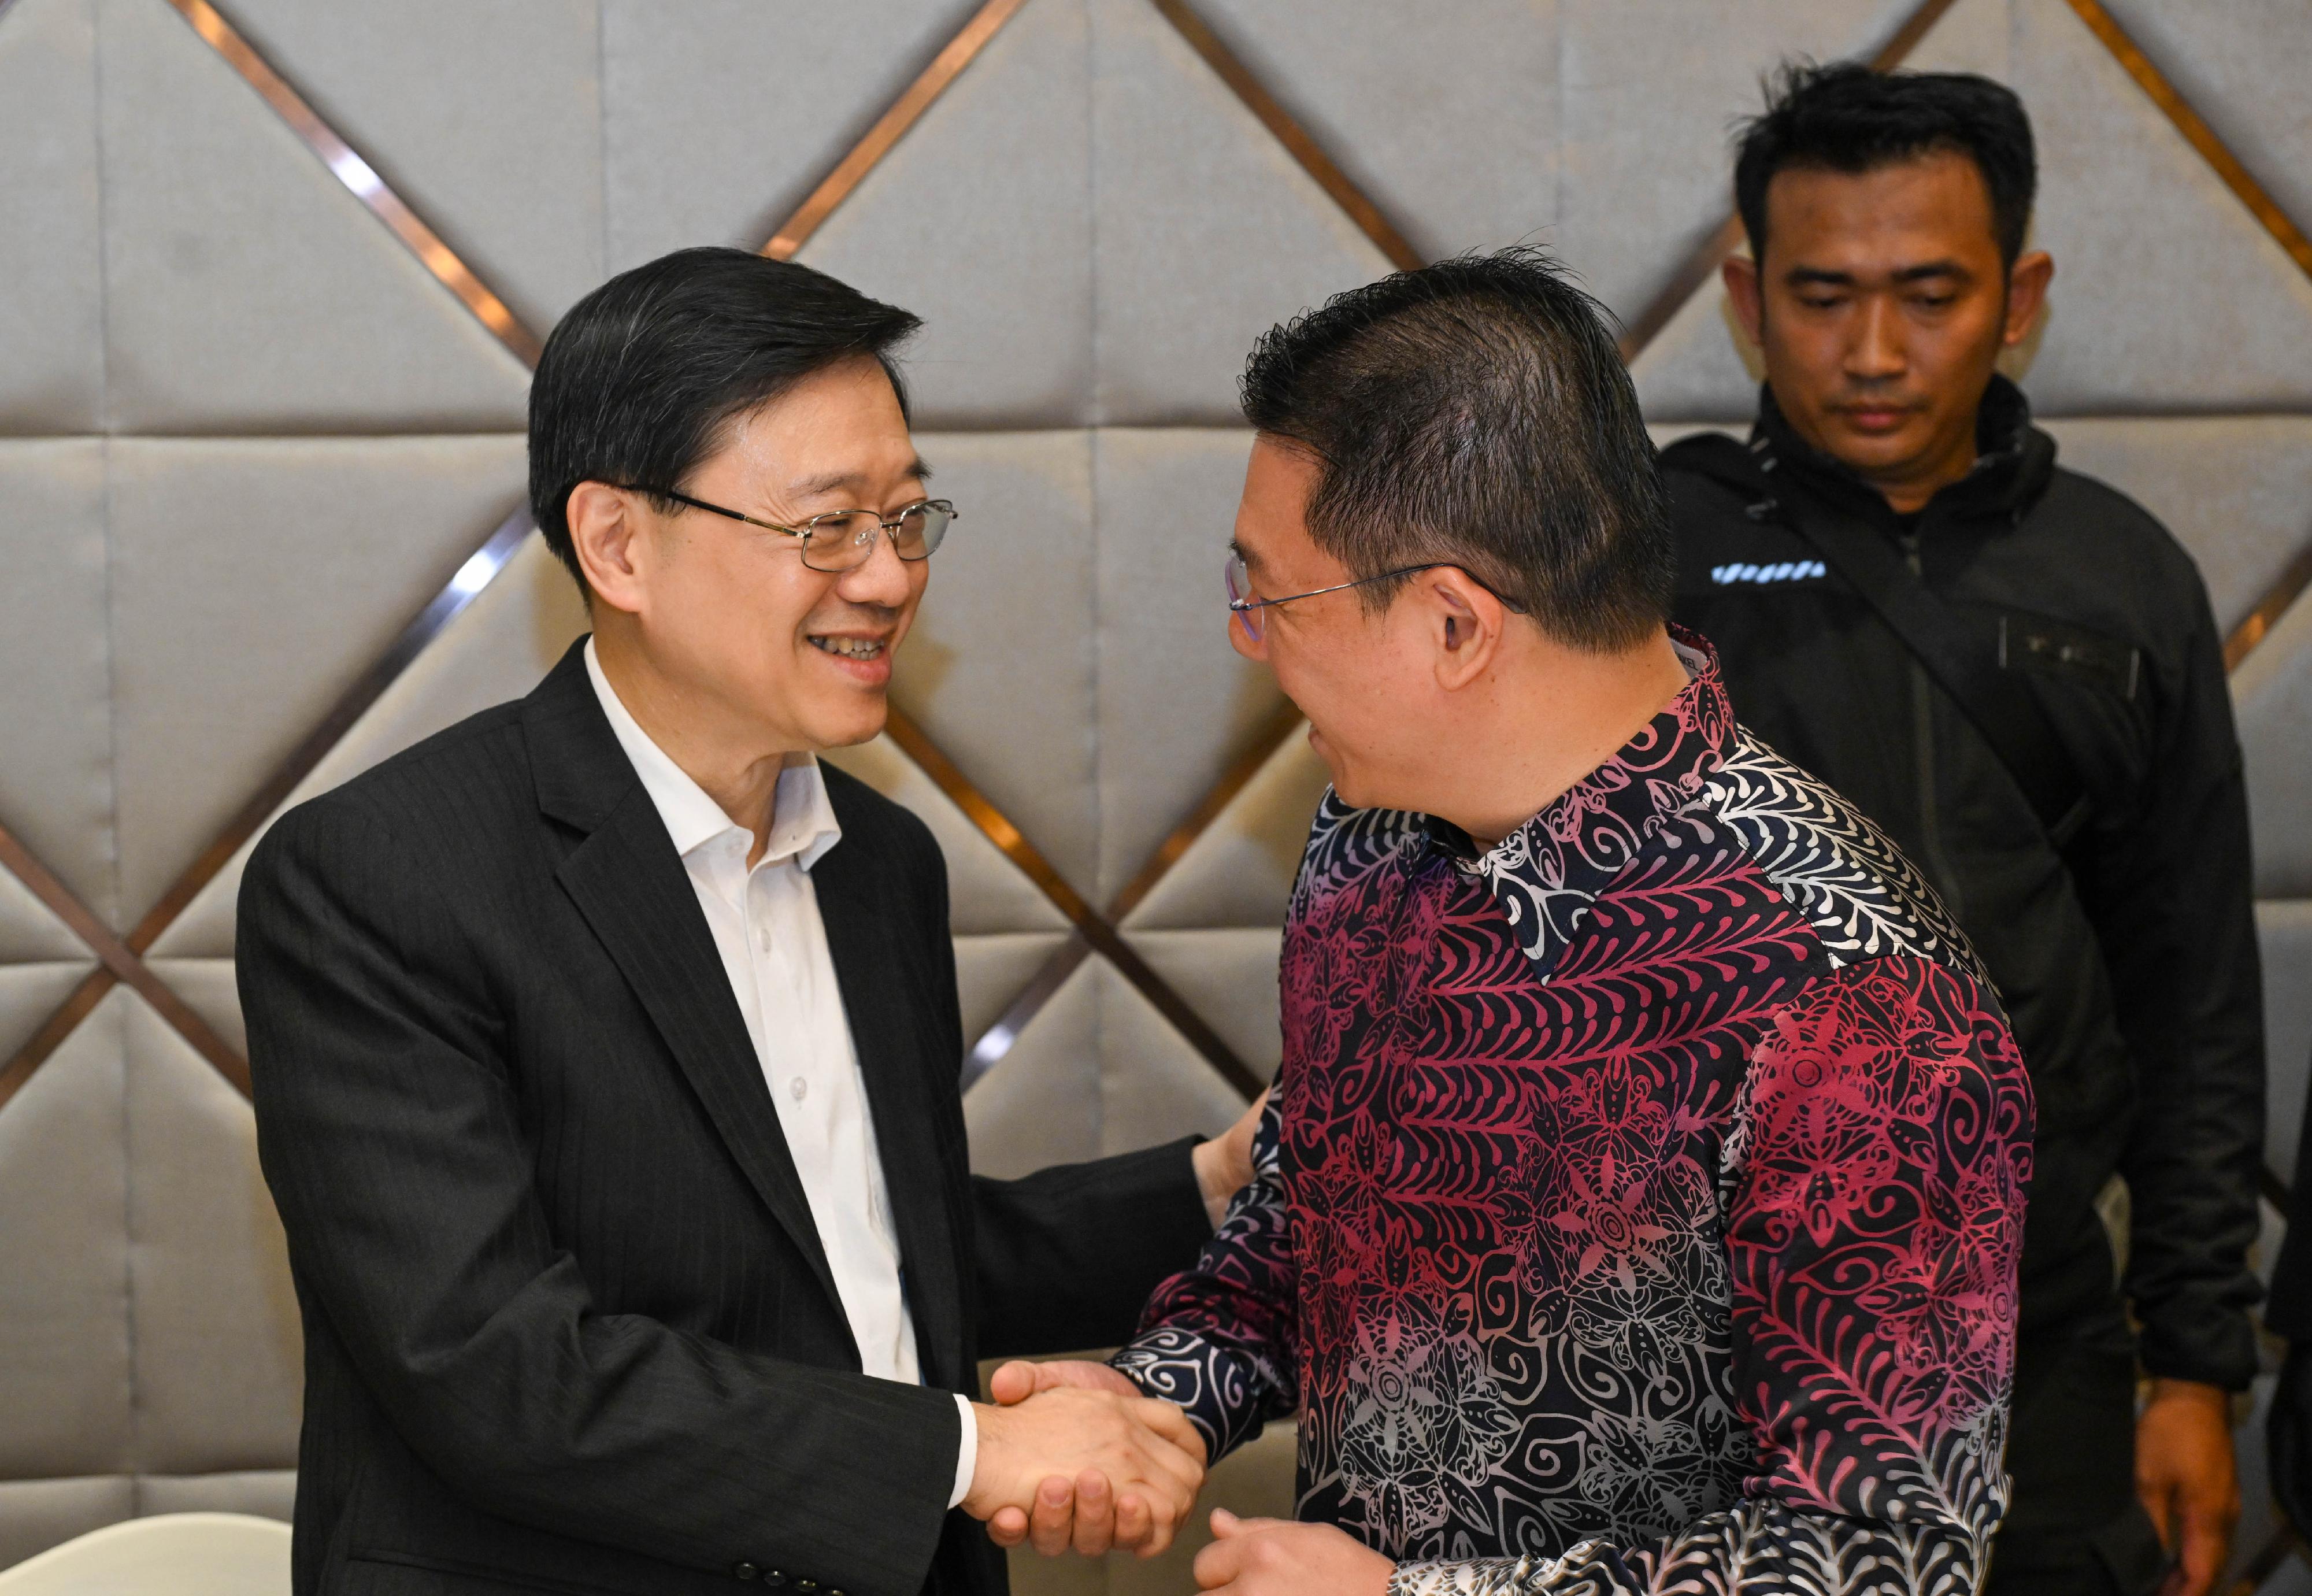 The Chief Executive, Mr John Lee, and the Hong Kong Special Administrative Region delegation attended a business dinner in Kuala Lumpur, Malaysia today (July 28). Photo shows Mr Lee (left) chatting with the Minister of Local Government Development of Malaysia, Mr Nga Kor Ming (right), at the dinner.